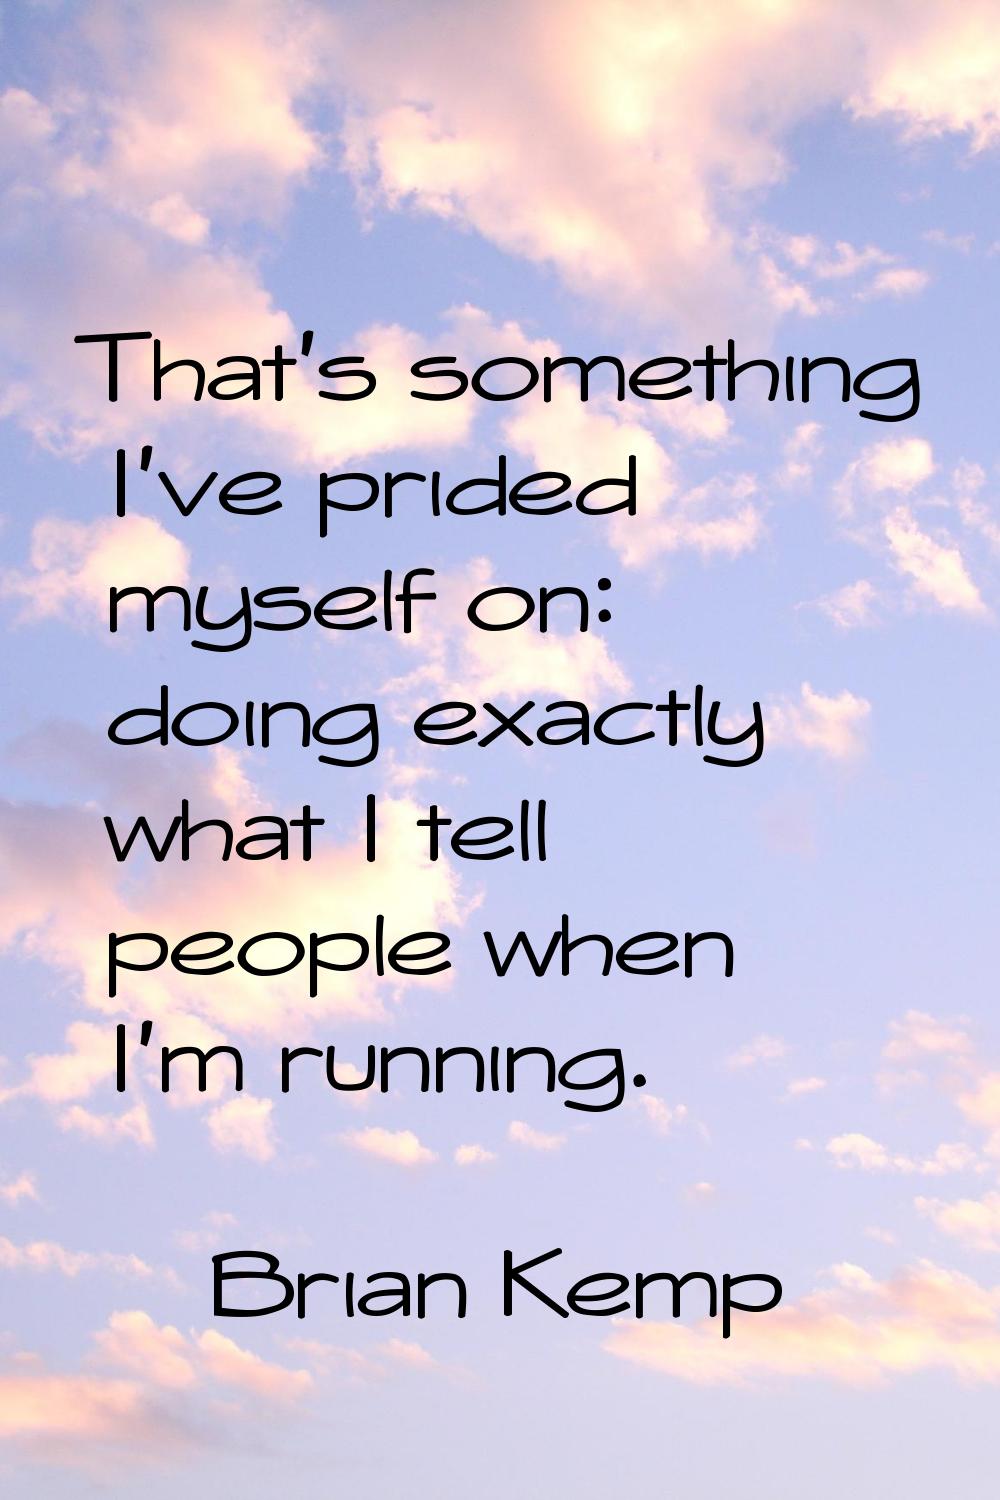 That's something I've prided myself on: doing exactly what I tell people when I'm running.